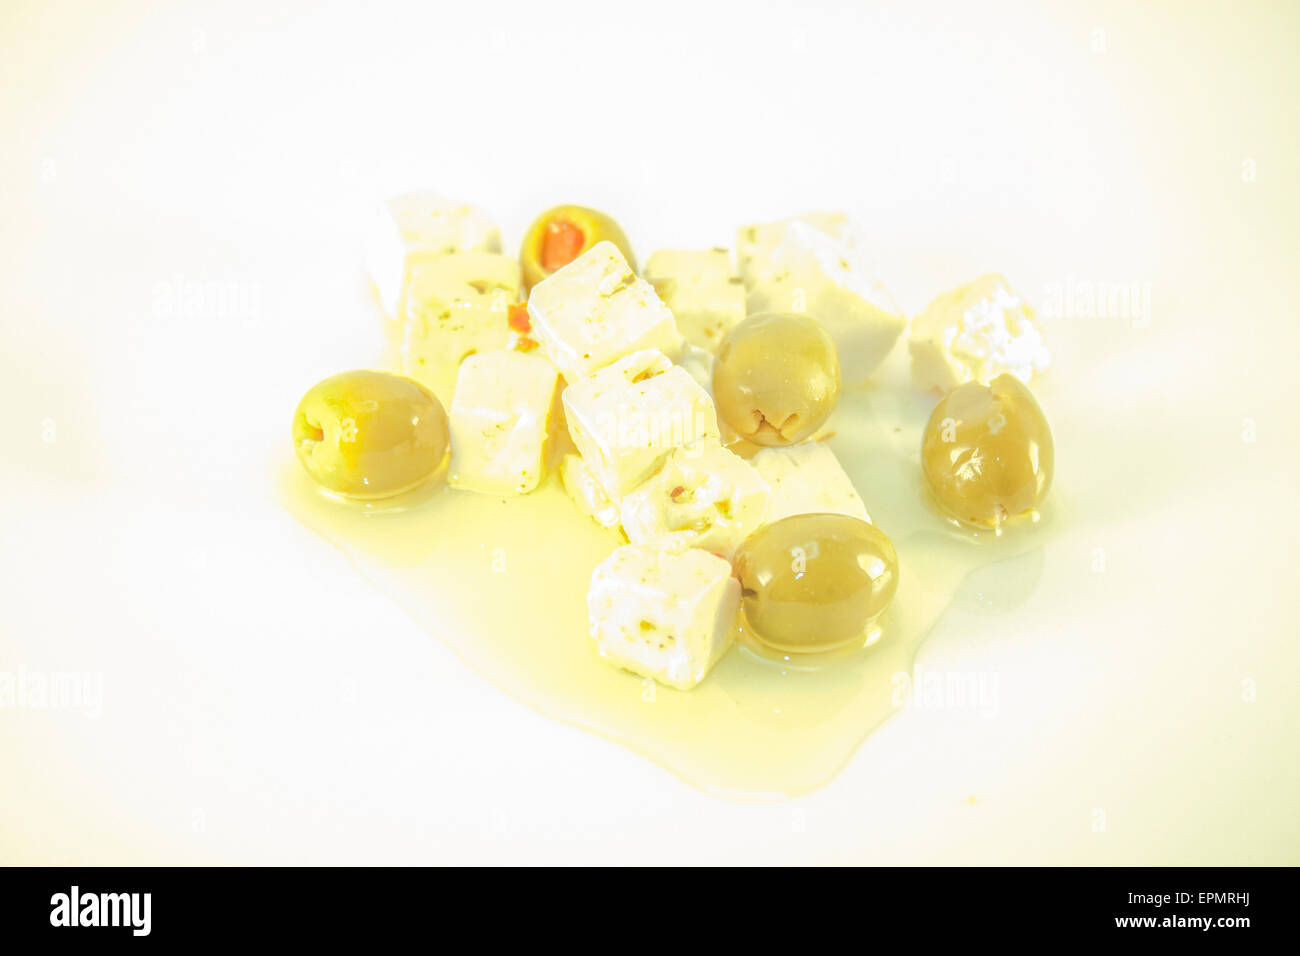 White feta cheese and green olives, isolated on white background Stock Photo